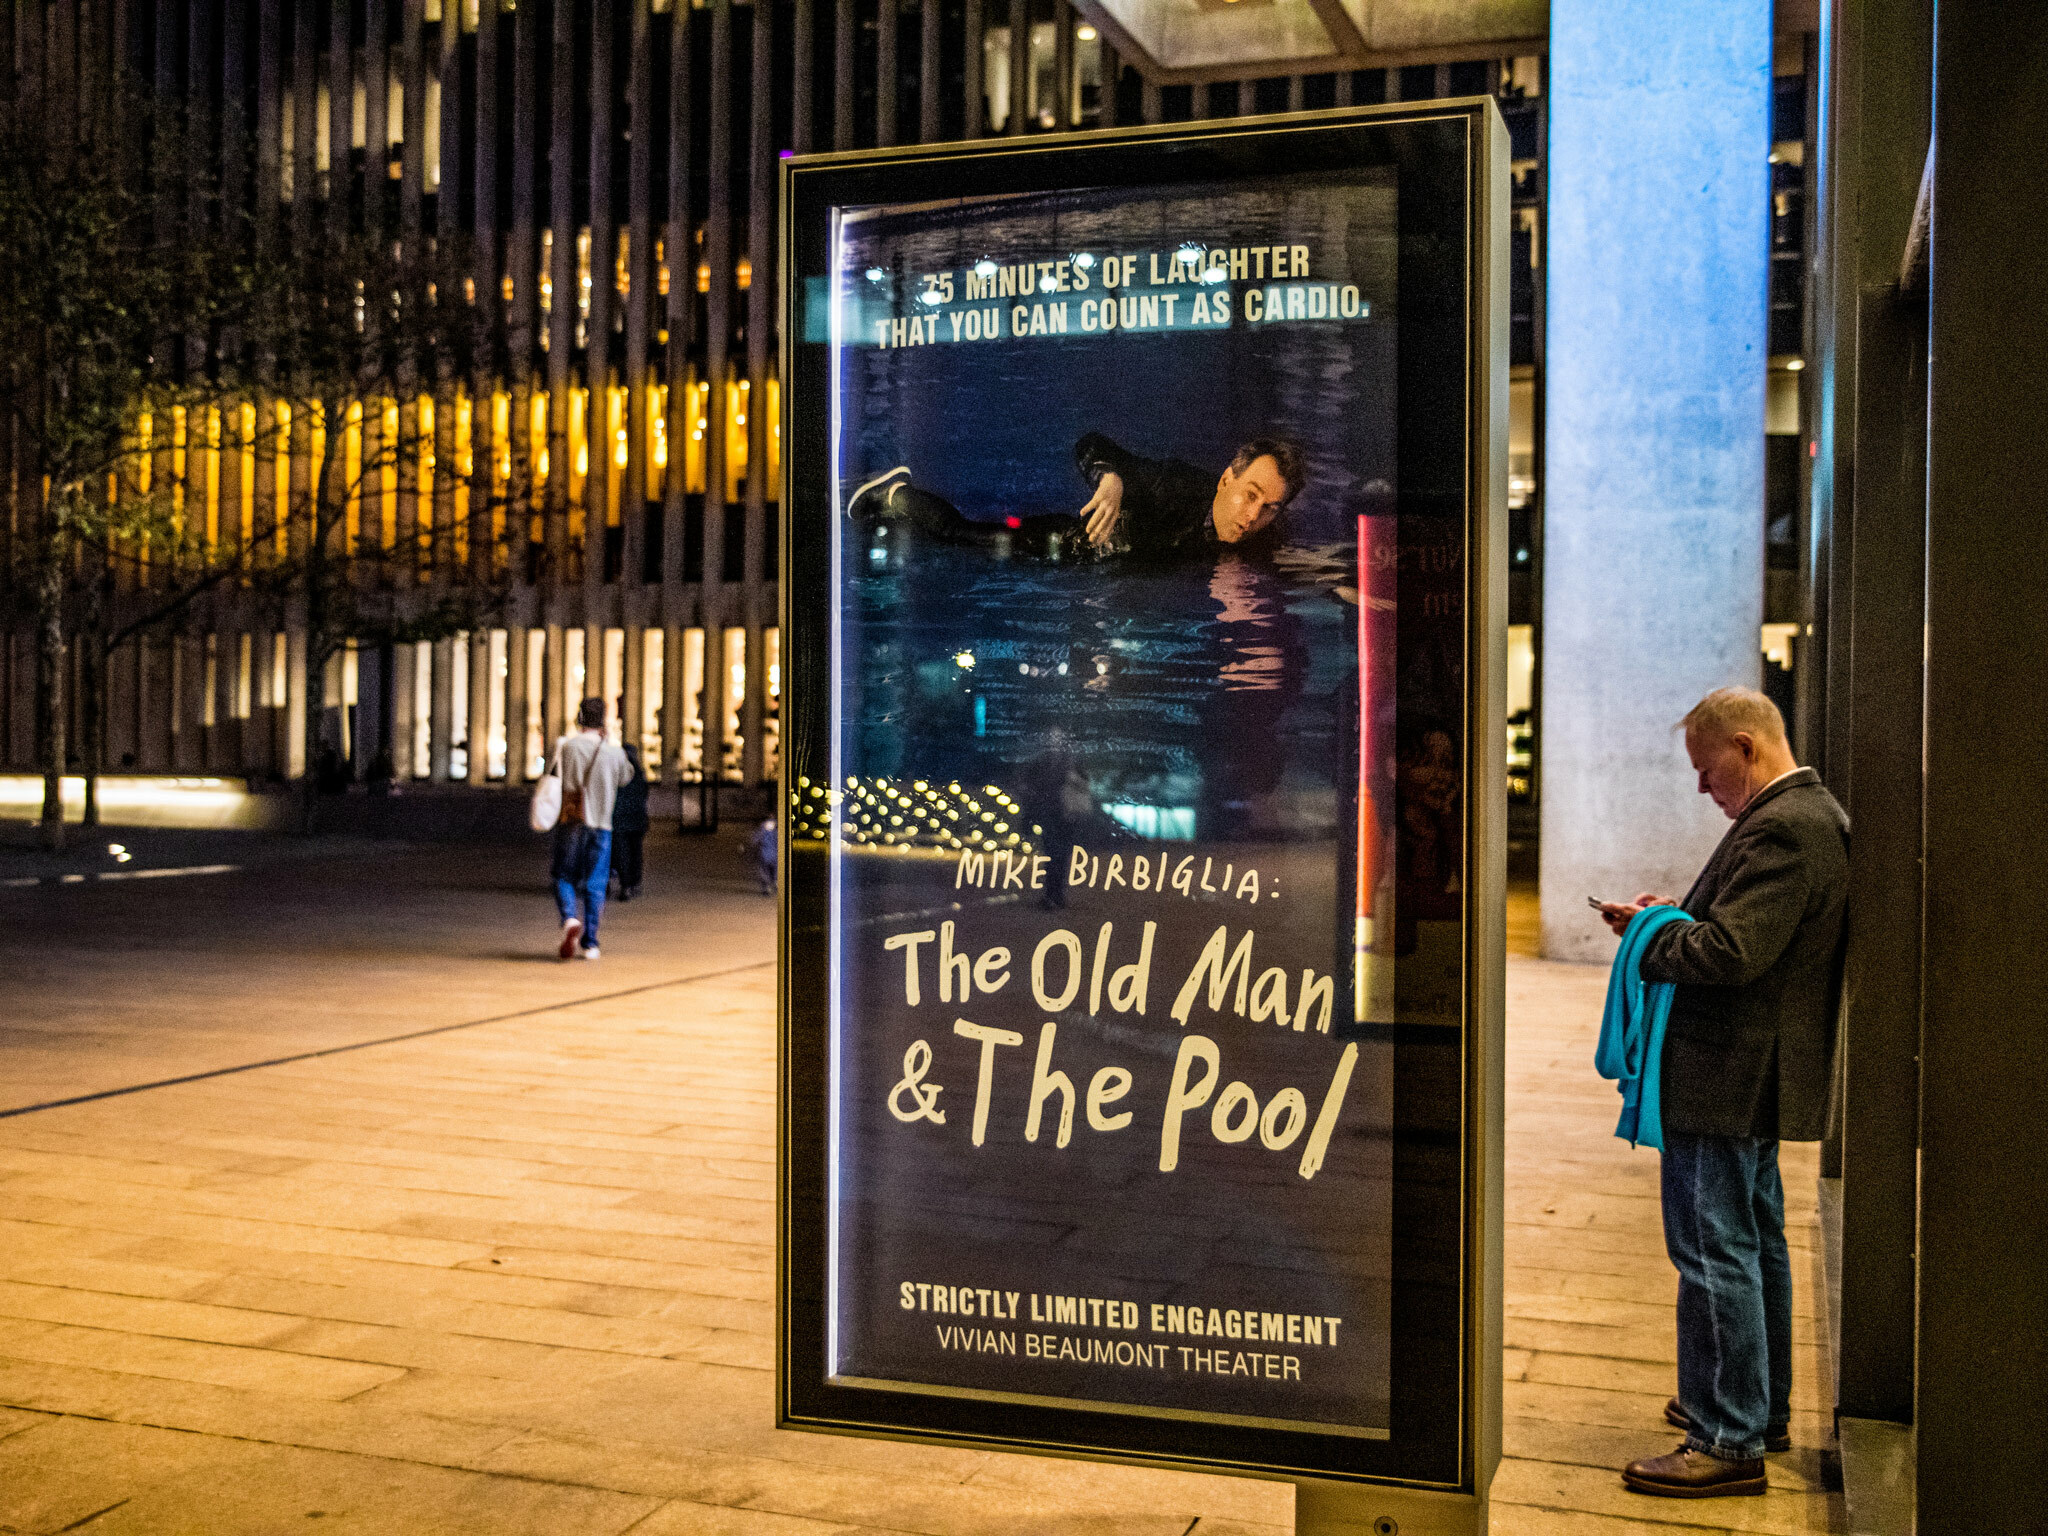 The Old Man and The Pool on Broadway